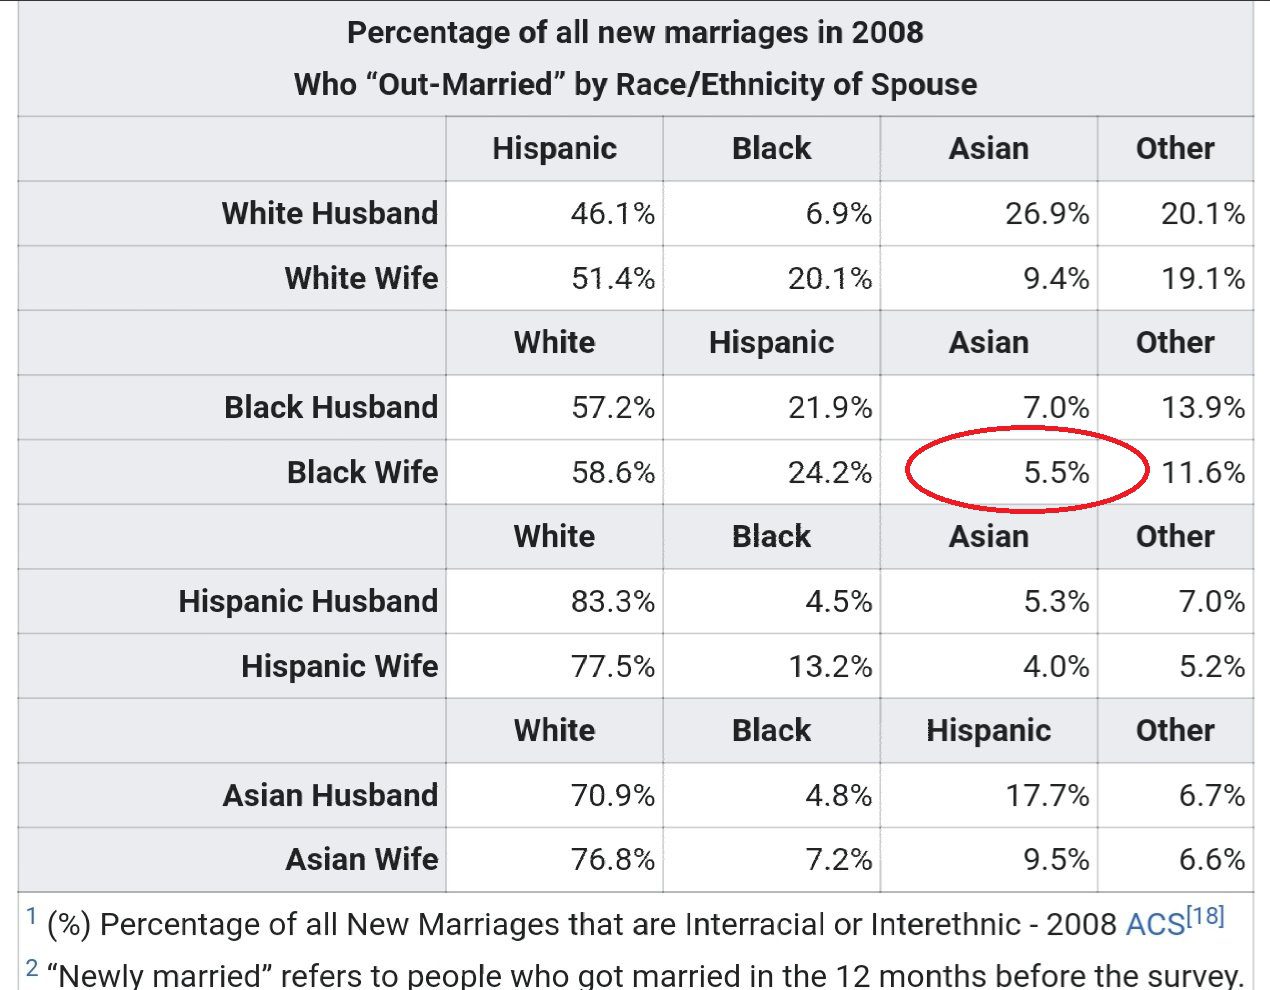 Intermarriage Rates for AMBW Couples: Pew Research Center, 2008